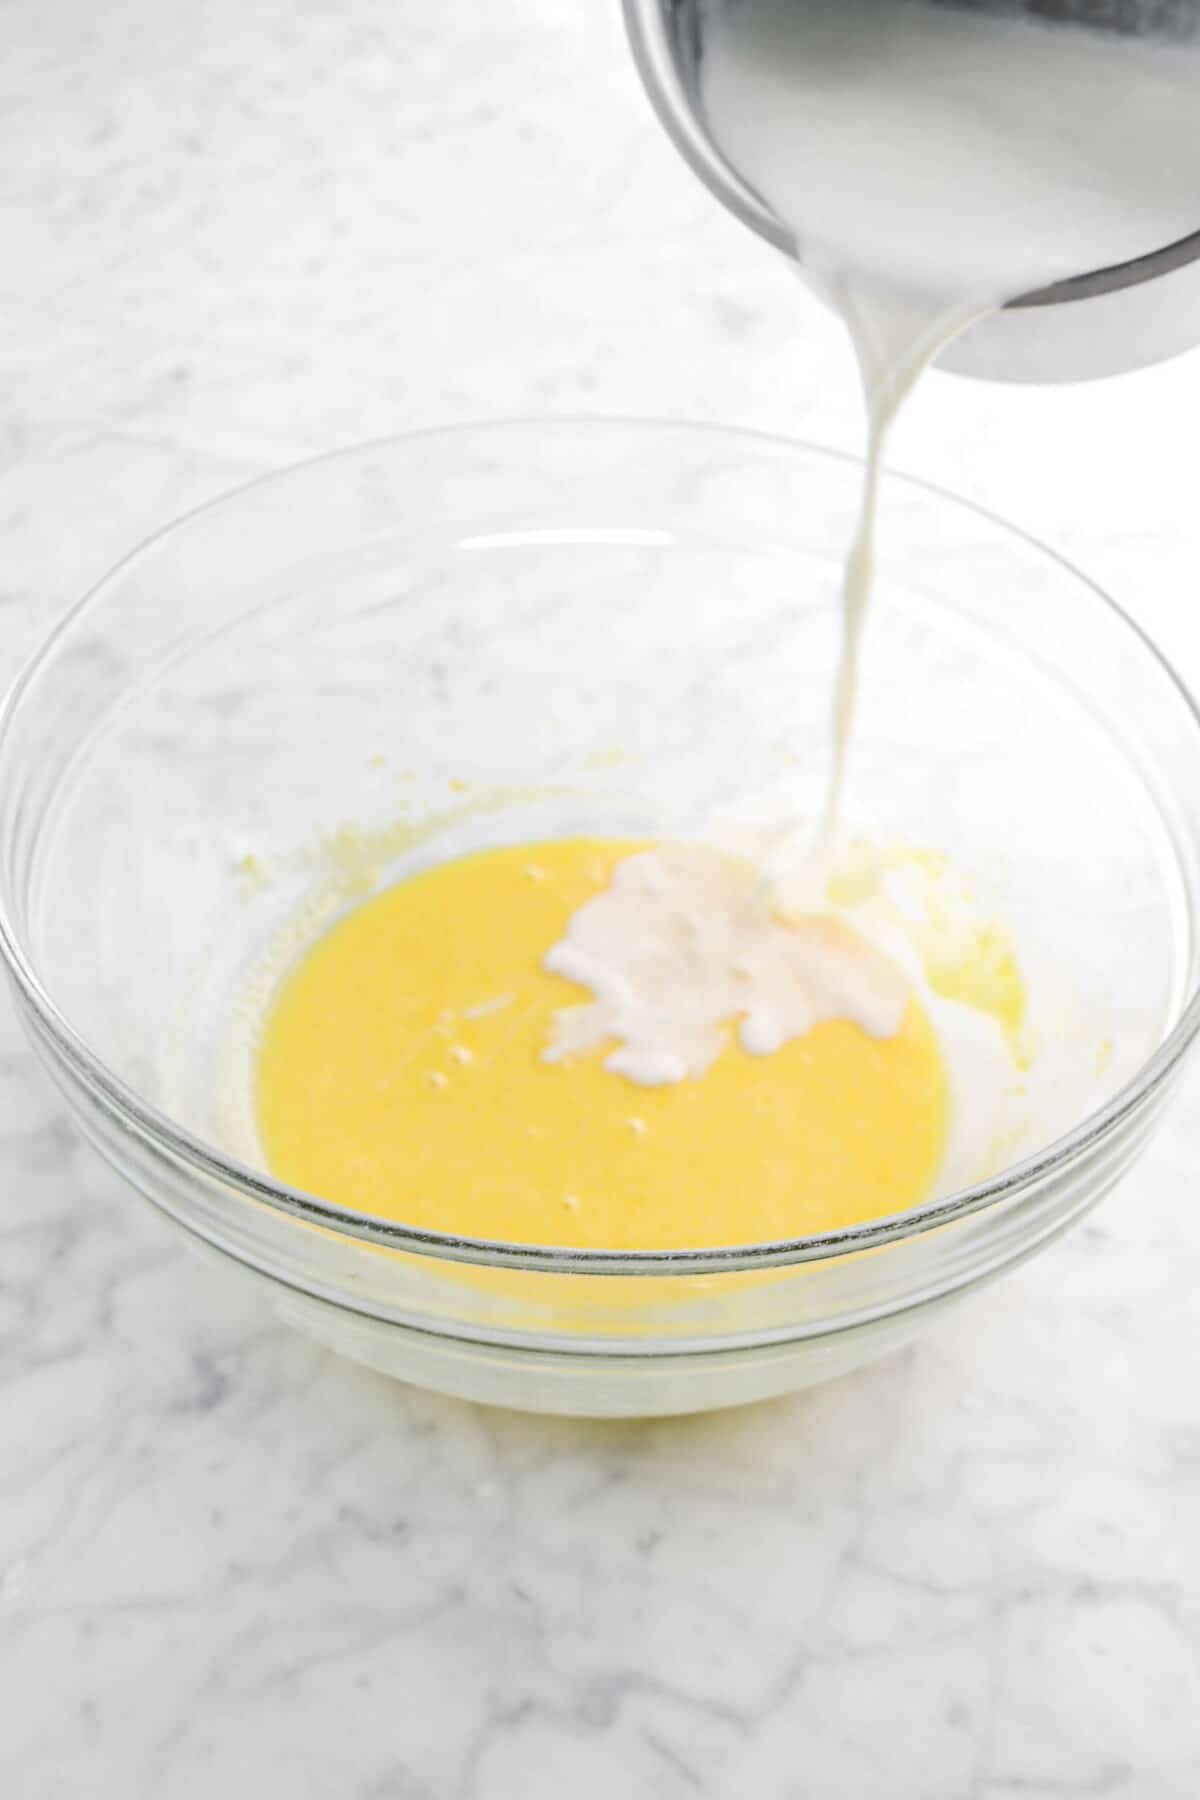 milk being poured into egg mixture